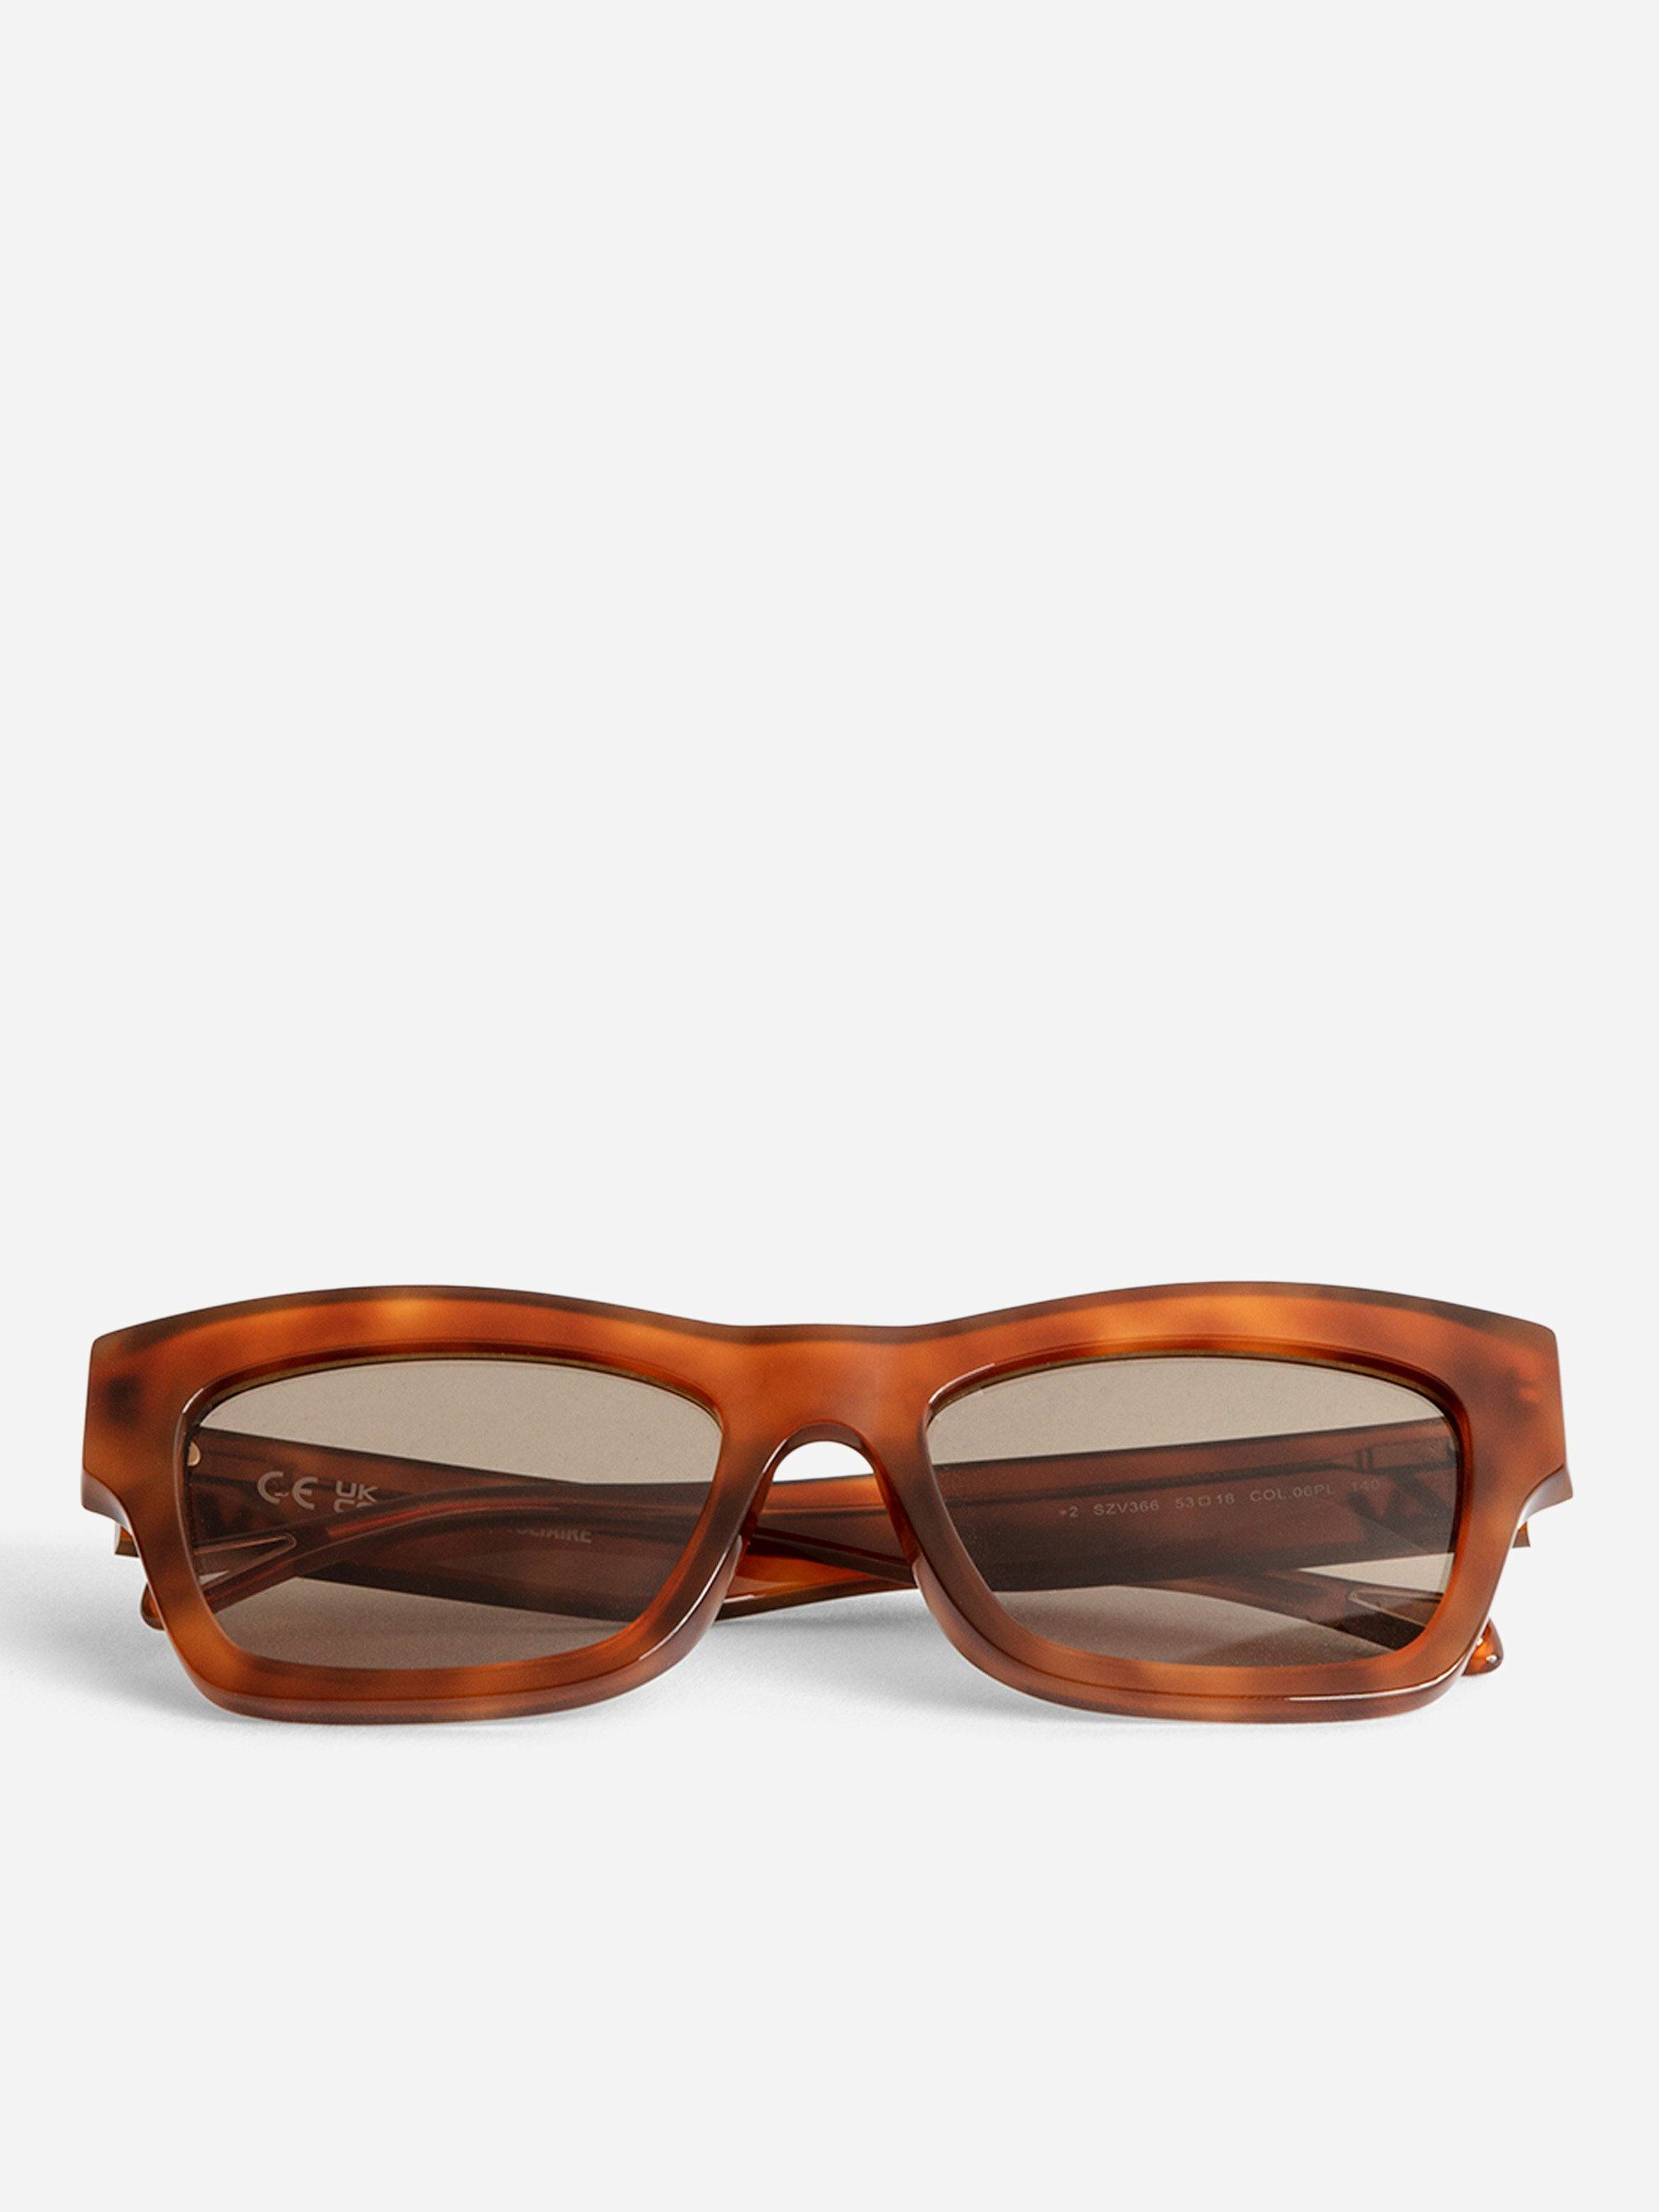 ZV23H1 Sunglasses - Unisex brown rectangular sunglasses with the ZV logo on the temples.